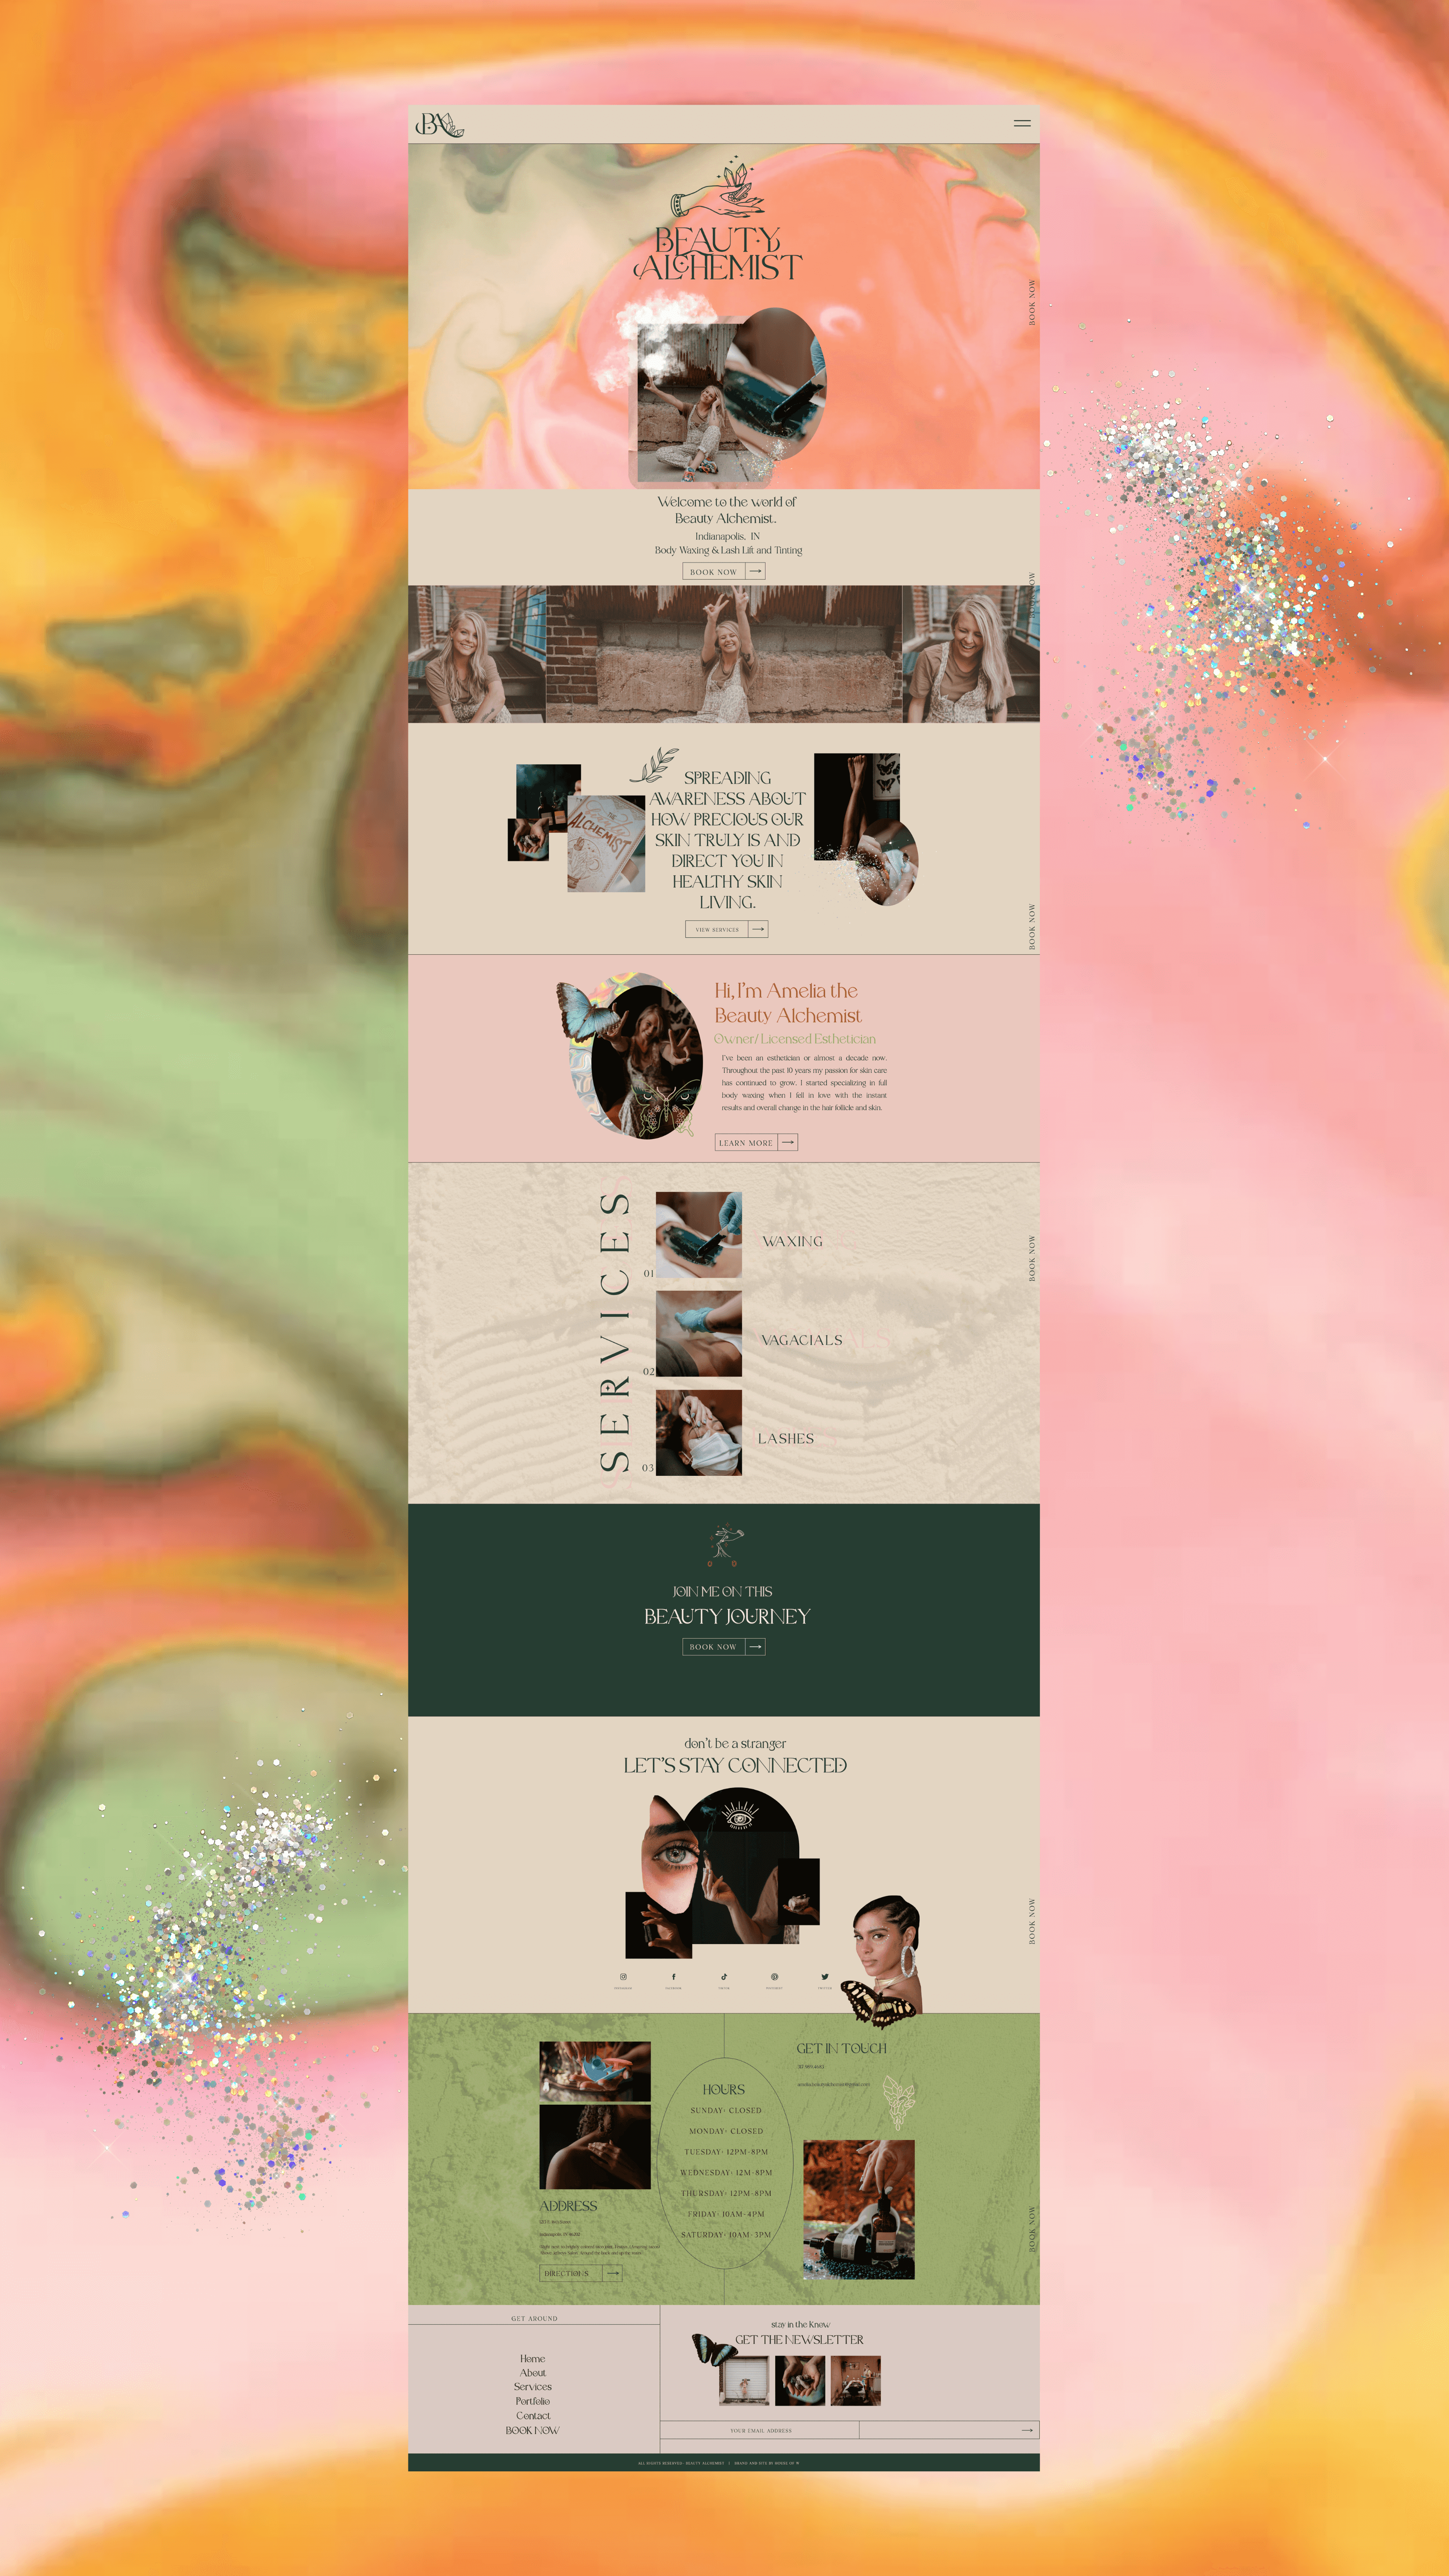 Website design for a feminine and mystical esthetician brand and web design by House of W, a brand and web designer for photographers and creatives.